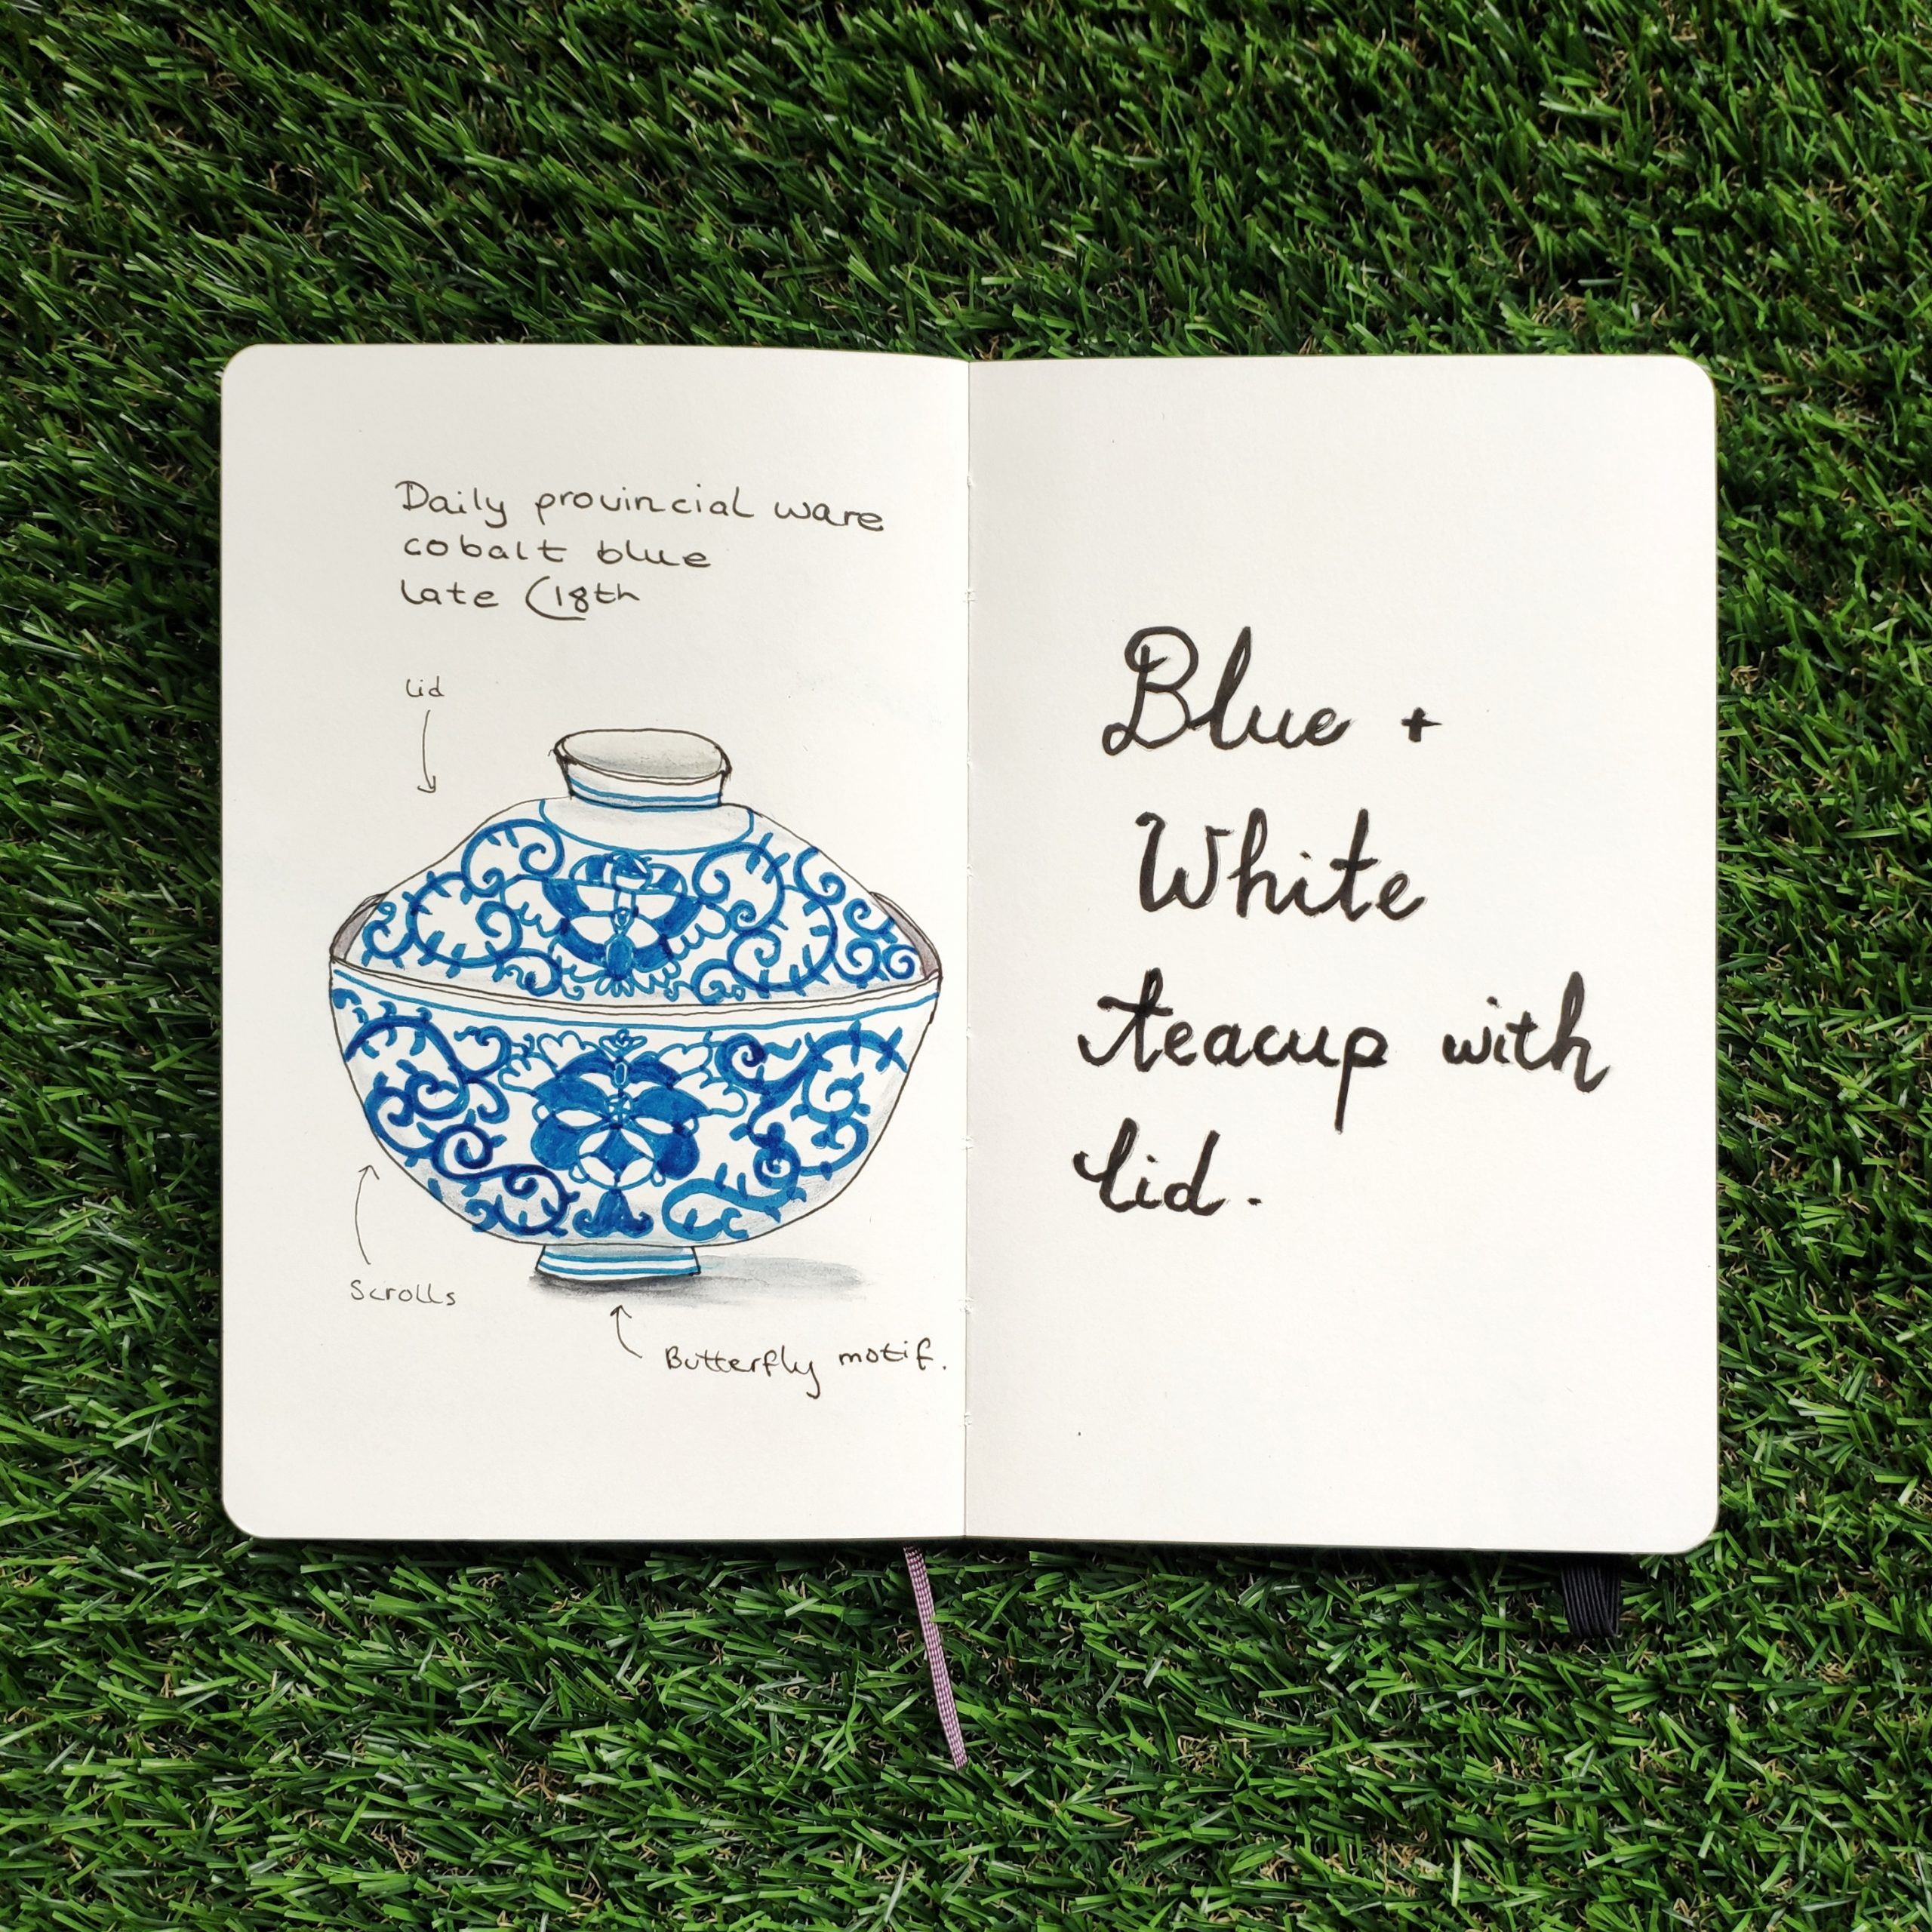 Blue and white teacup